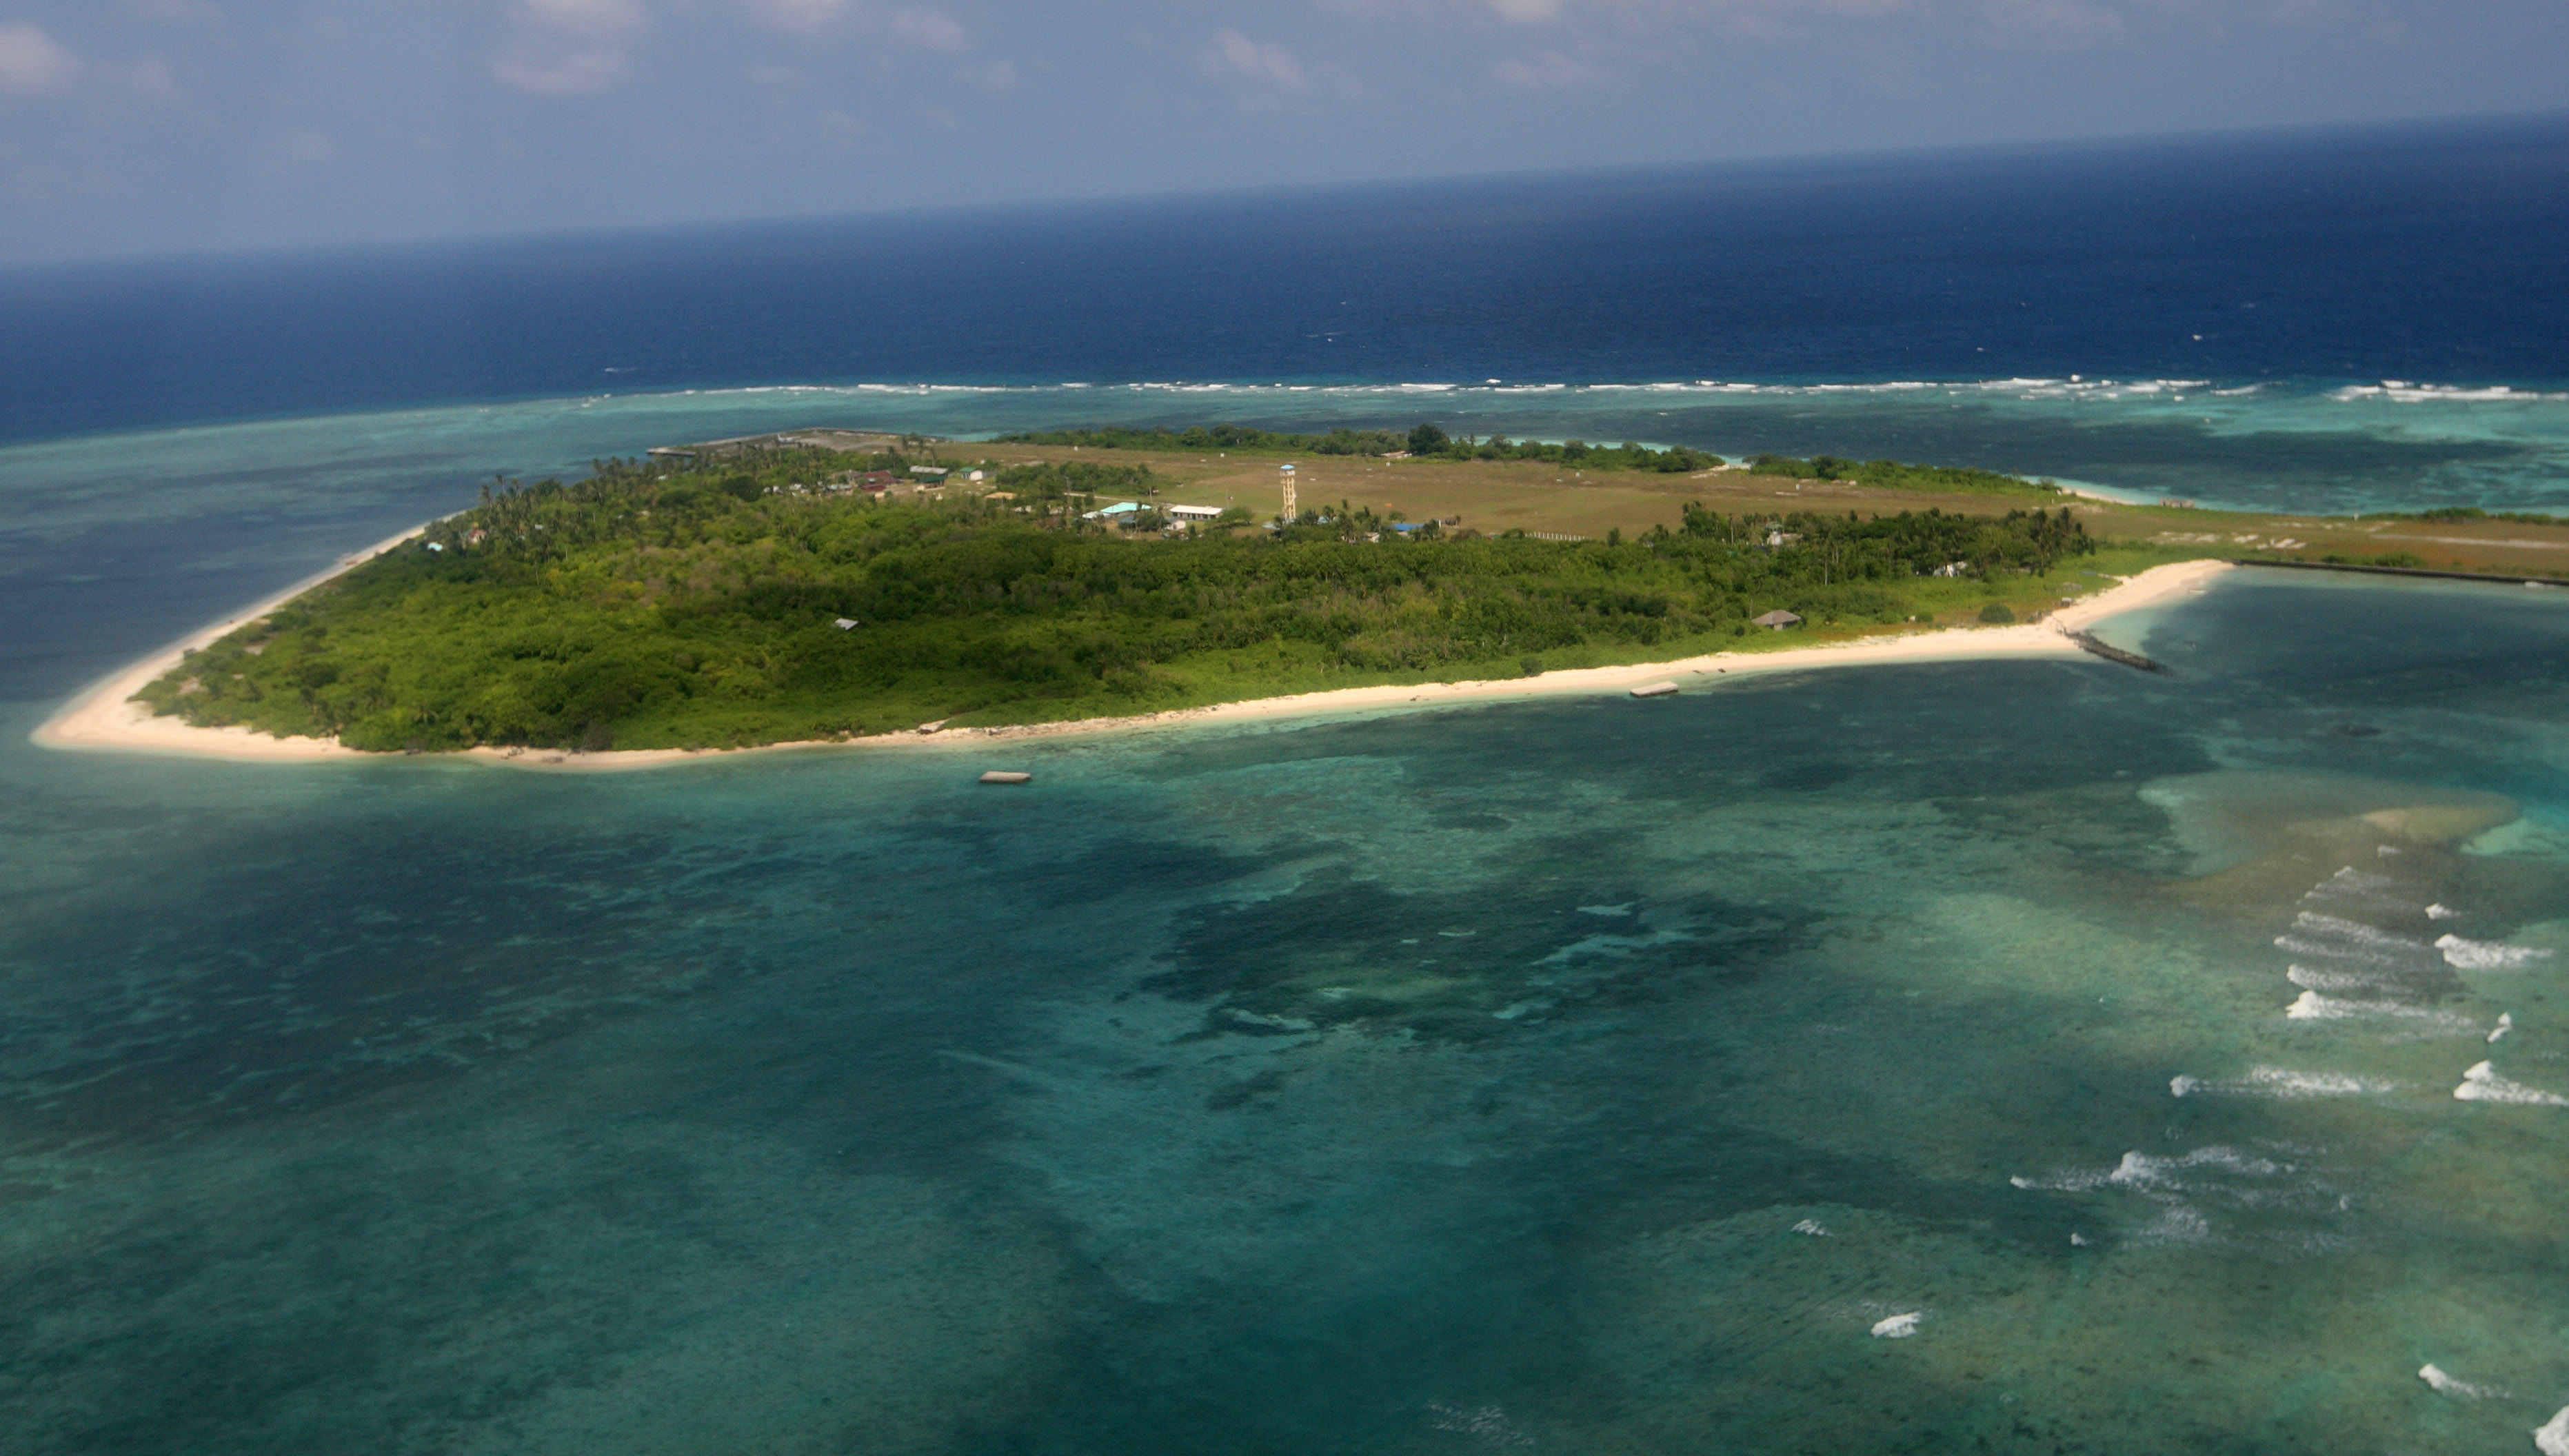 An aerial photo shows Thitu Island, part of the disputed Spratly group of islands, in the South China Sea located off the coast of western Philippines on July 20, 2011.  Philippine lawmakers flew to an island in the disputed Spratly chain, despite warnings from China that the trip would destabilise the region and damage ties.   AFP PHOTO / POOL / AFP PHOTO / POOL / ROLEX DELA PENA